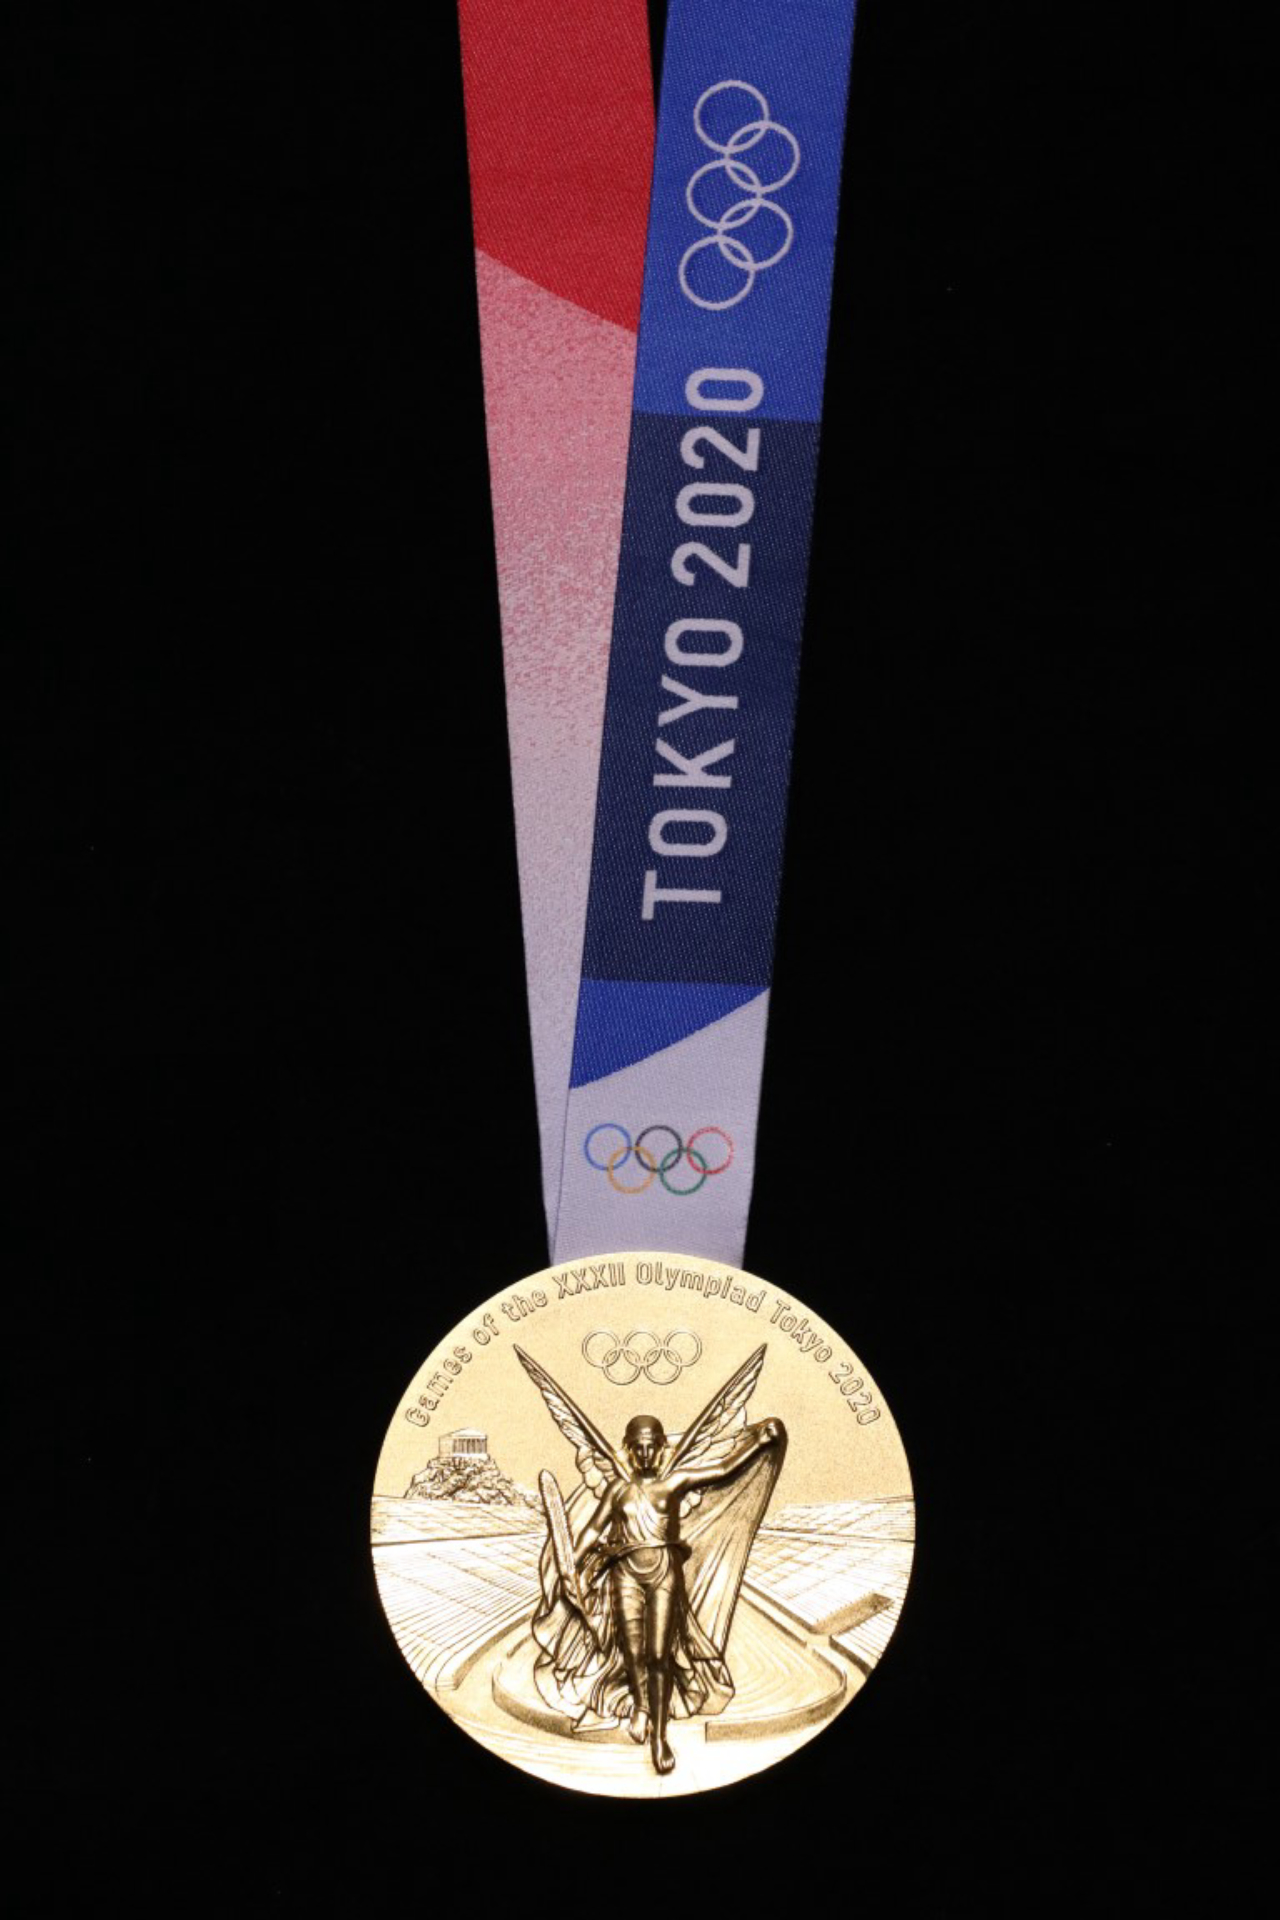 This undated handout photograph released on July 24, 2019 by Tokyo 2020 shows the front side of gold medal for the Tokyo 2020 Olympic Games in Tokyo. (Photo by Handout / Tokyo 2020 / AFP) / - NO Internet - NO RESALE / -----EDITORS NOTE --- RESTRICTED TO EDITORIAL USE - MANDATORY CREDIT "AFP PHOTO / Tokyo 2020" - NO MARKETING - NO ADVERTISING CAMPAIGNS - DISTRIBUTED AS A SERVICE TO CLIENTS - NO ARCHIVES